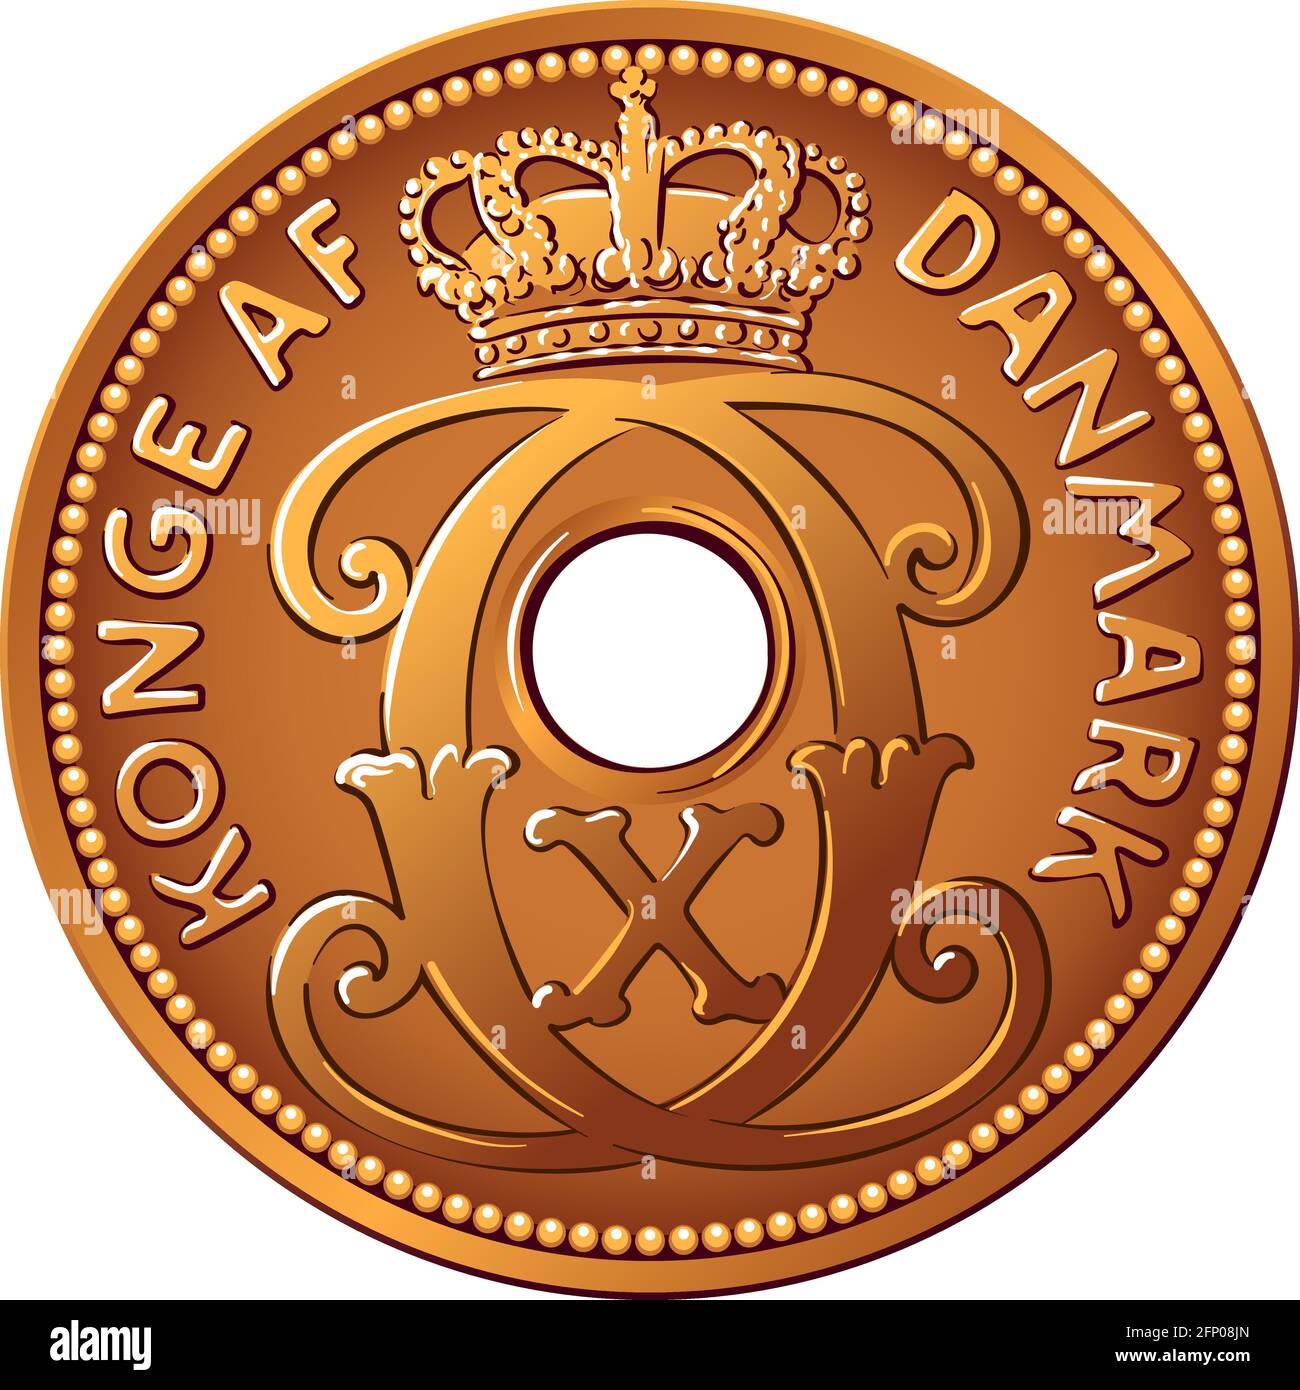 Danish money tin-bronze 5 ore coin. Krone, official currency of Denmark, Greenland, and the Faroe Islands. Stock Vector